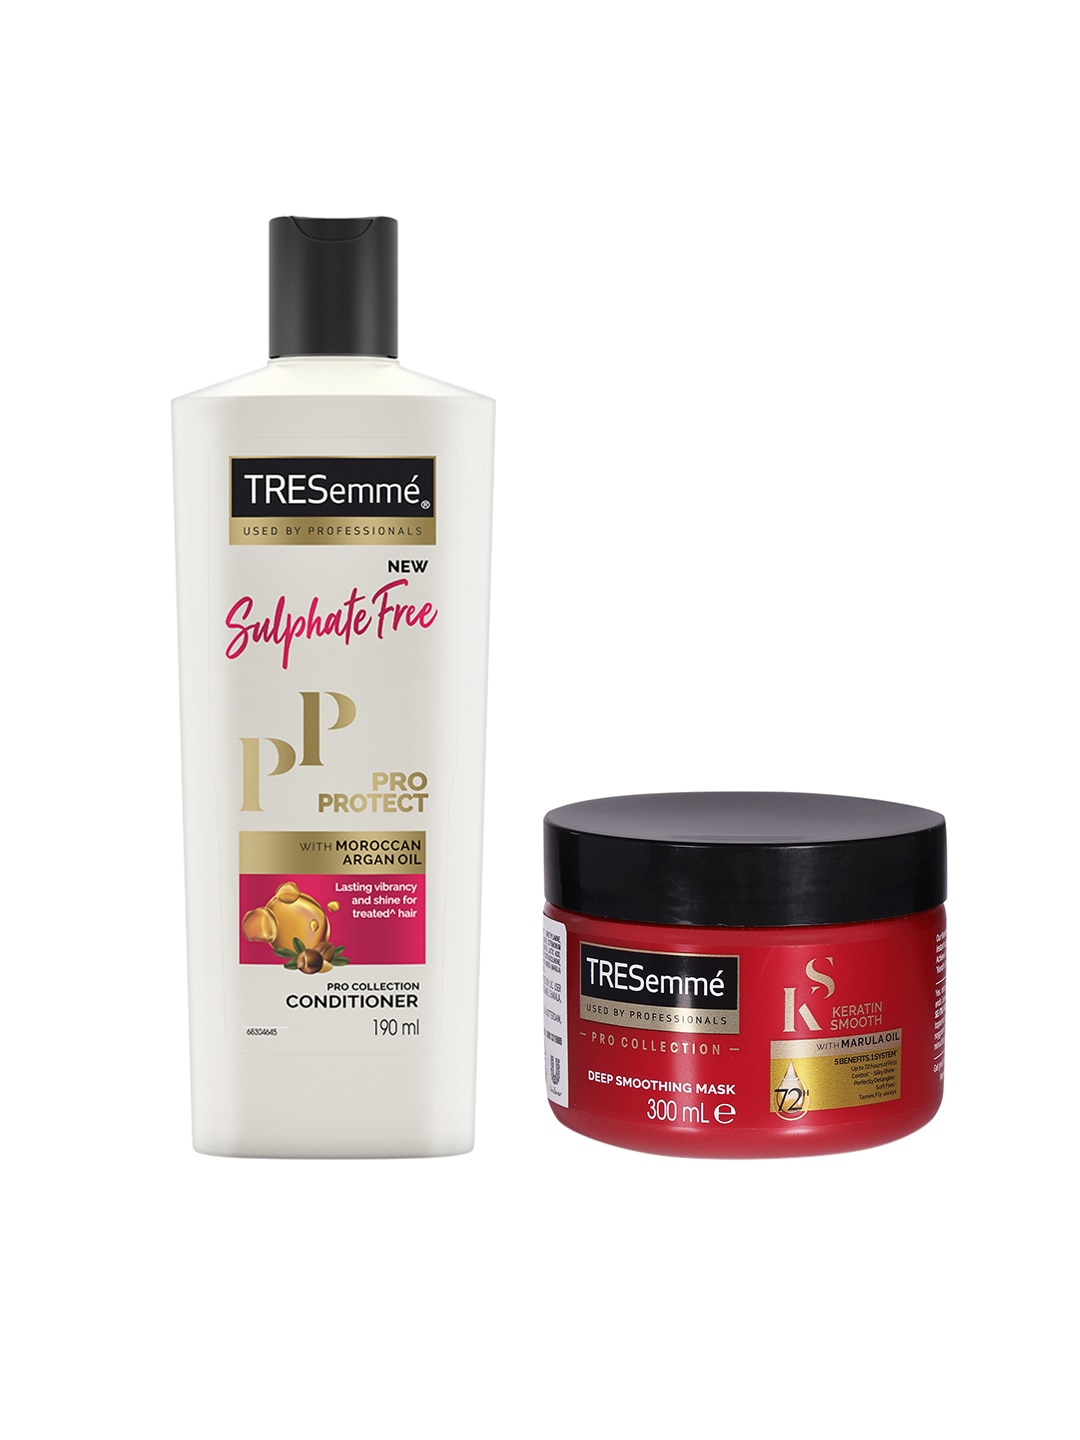 TRESemme Set of Keratin Smooth Mask 300 ml & Pro Protect Sulphate Free Conditioner 190 ml Price in India